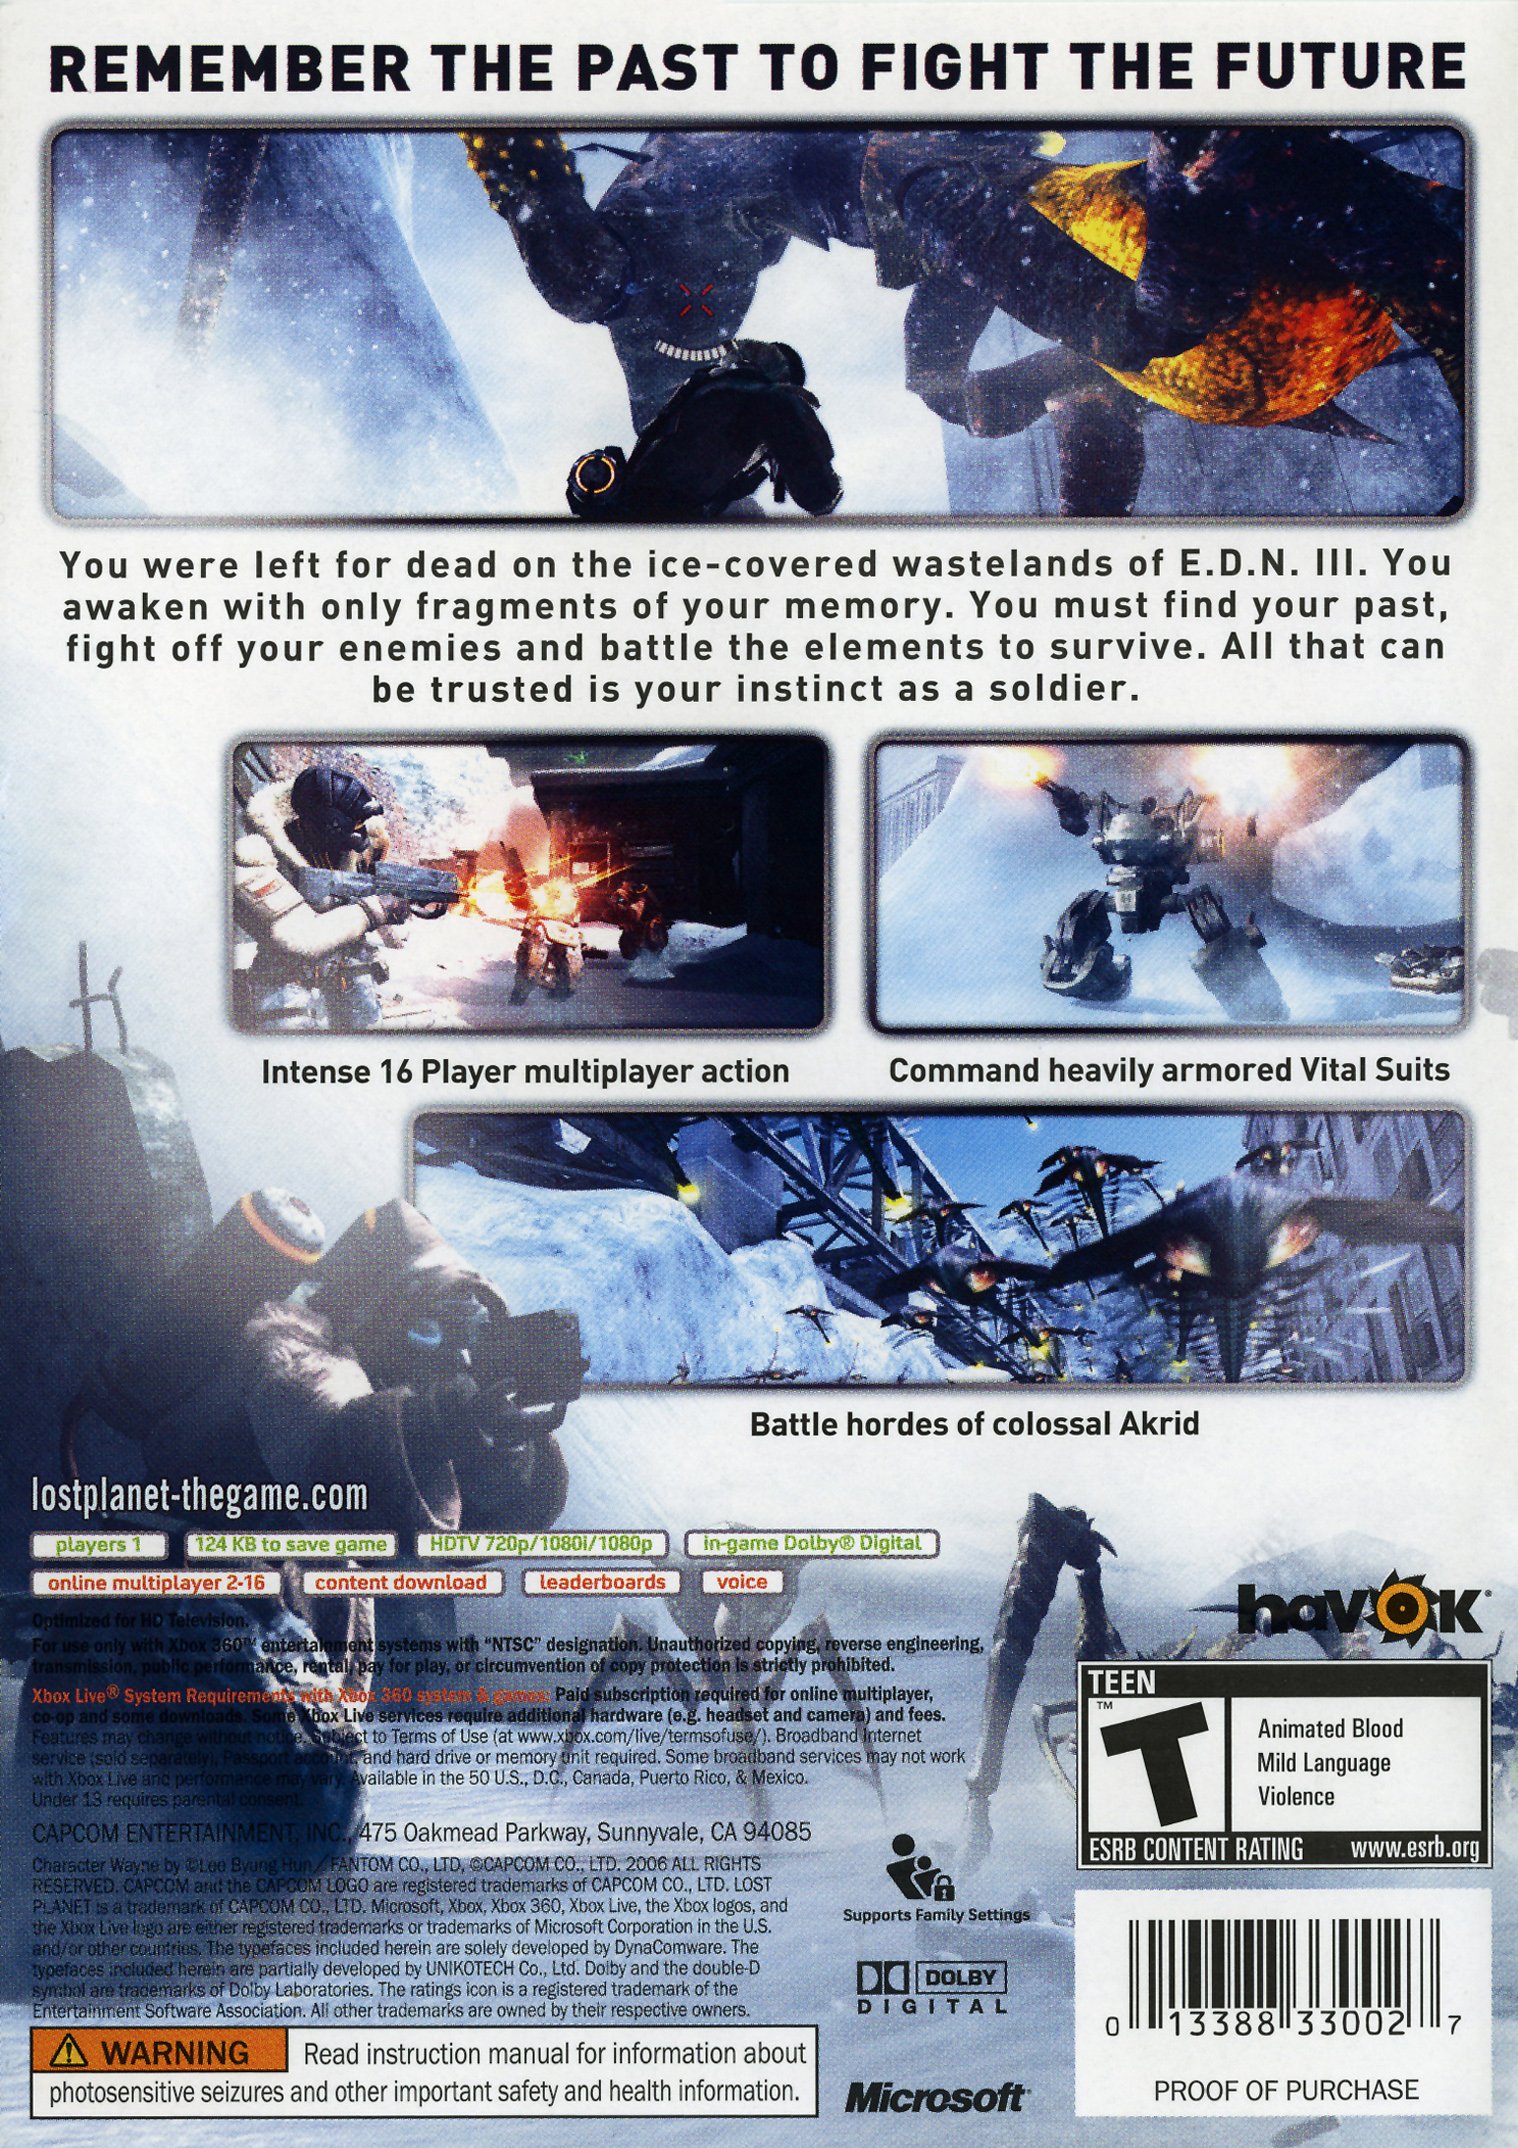 free download lost planet extreme condition game playstation 3 game